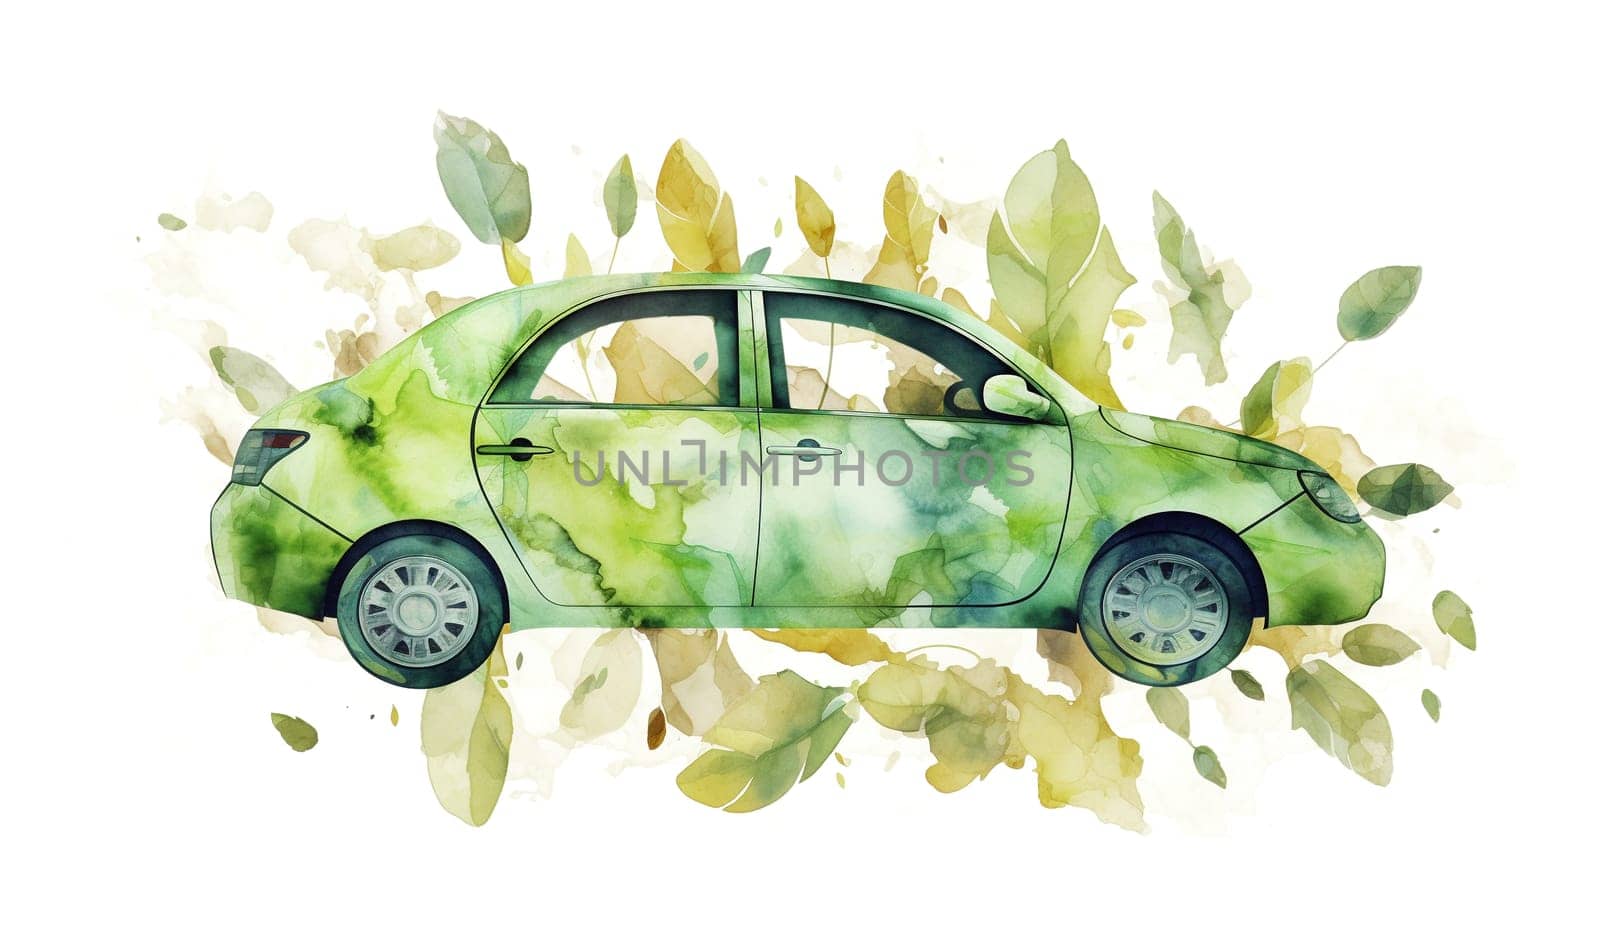 Watercolor illustration of green modern car amidst green foliage. Concept of eco-friendly transportation and sustainable future